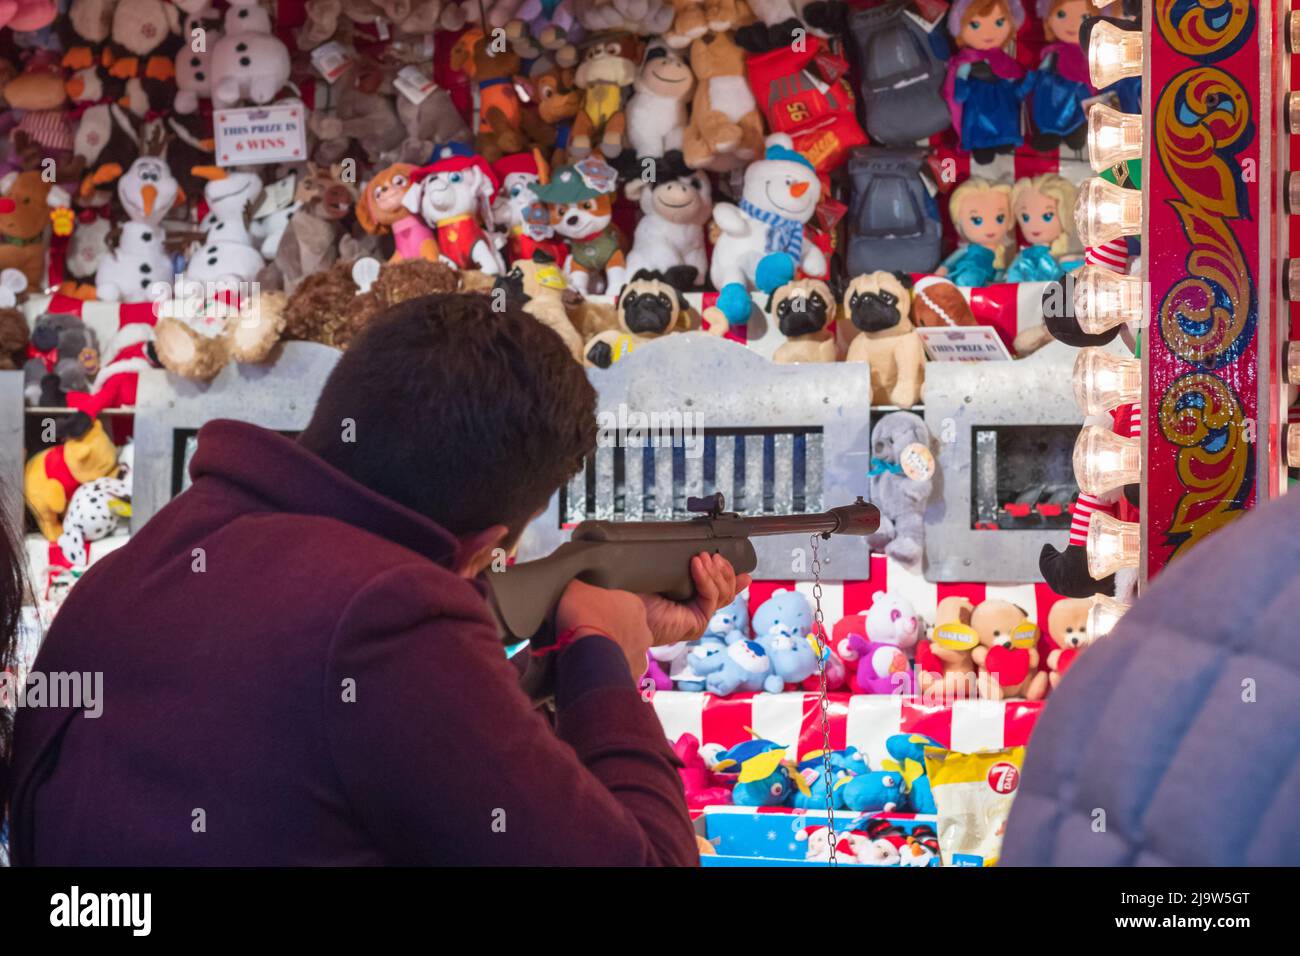 London, UK - December 2, 2021 - Tourist playing shooting game to win stuffed toys on the wall at Christmas funfair Hyde Park Winter Wonderland Stock Photo